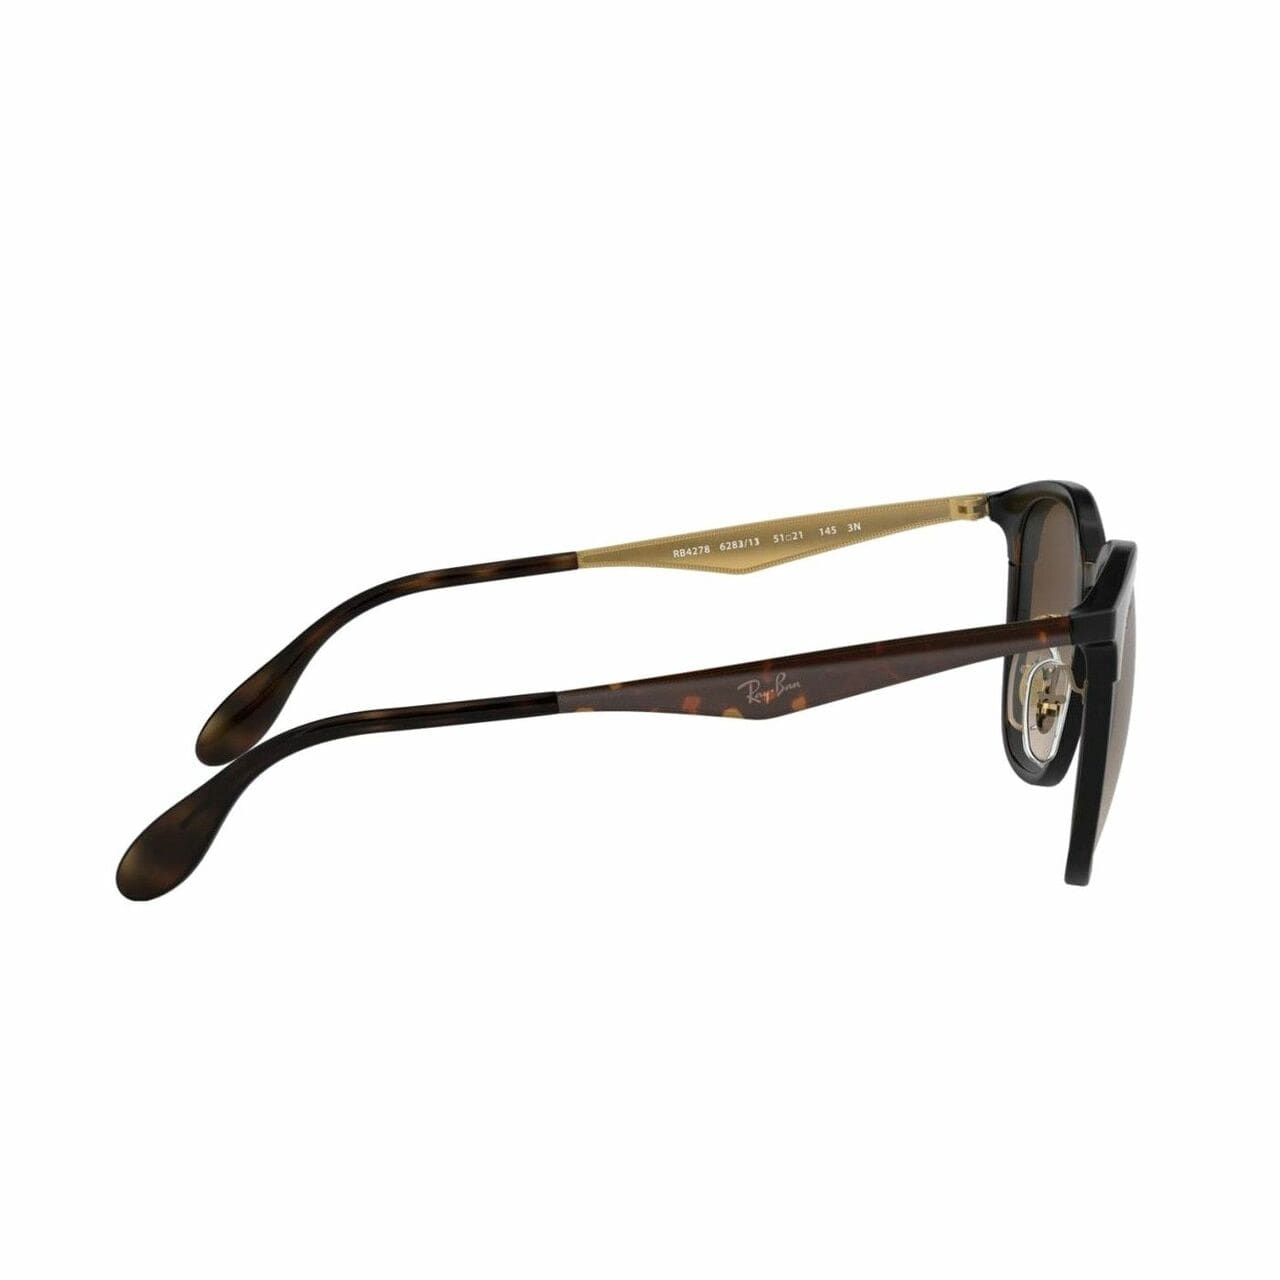 Ray-Ban RB4278-628313 Tortoise Square Injected Brown Gradient Lens Sunglasses 8053672730531